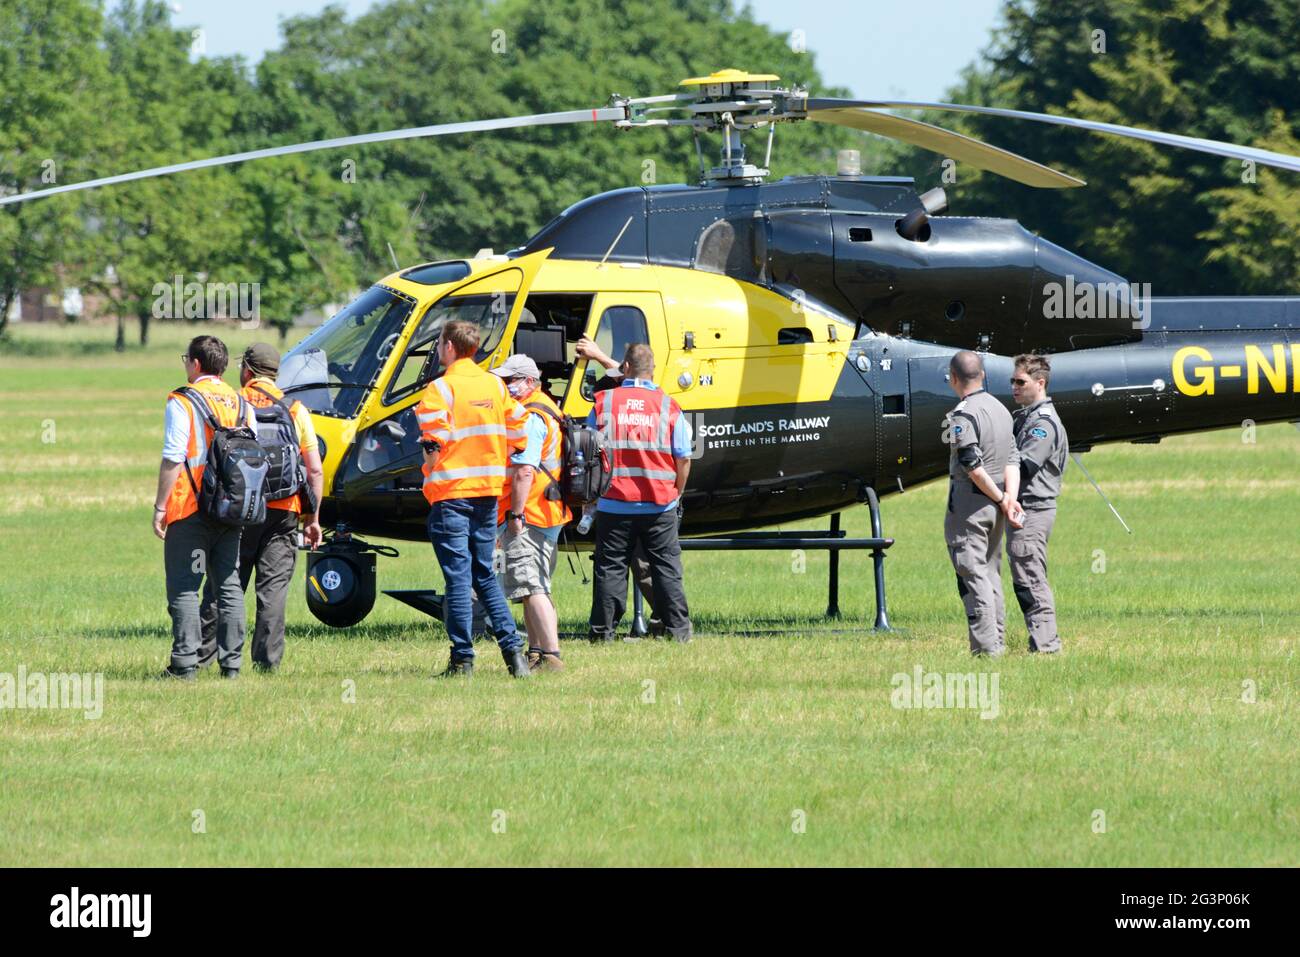 Network Rail Air Operations Eurocopter AS355 Écureuil 2 helicopters on display at the Rail Live trade show, Long Marston, Warwickshire, June 2021 Stock Photo